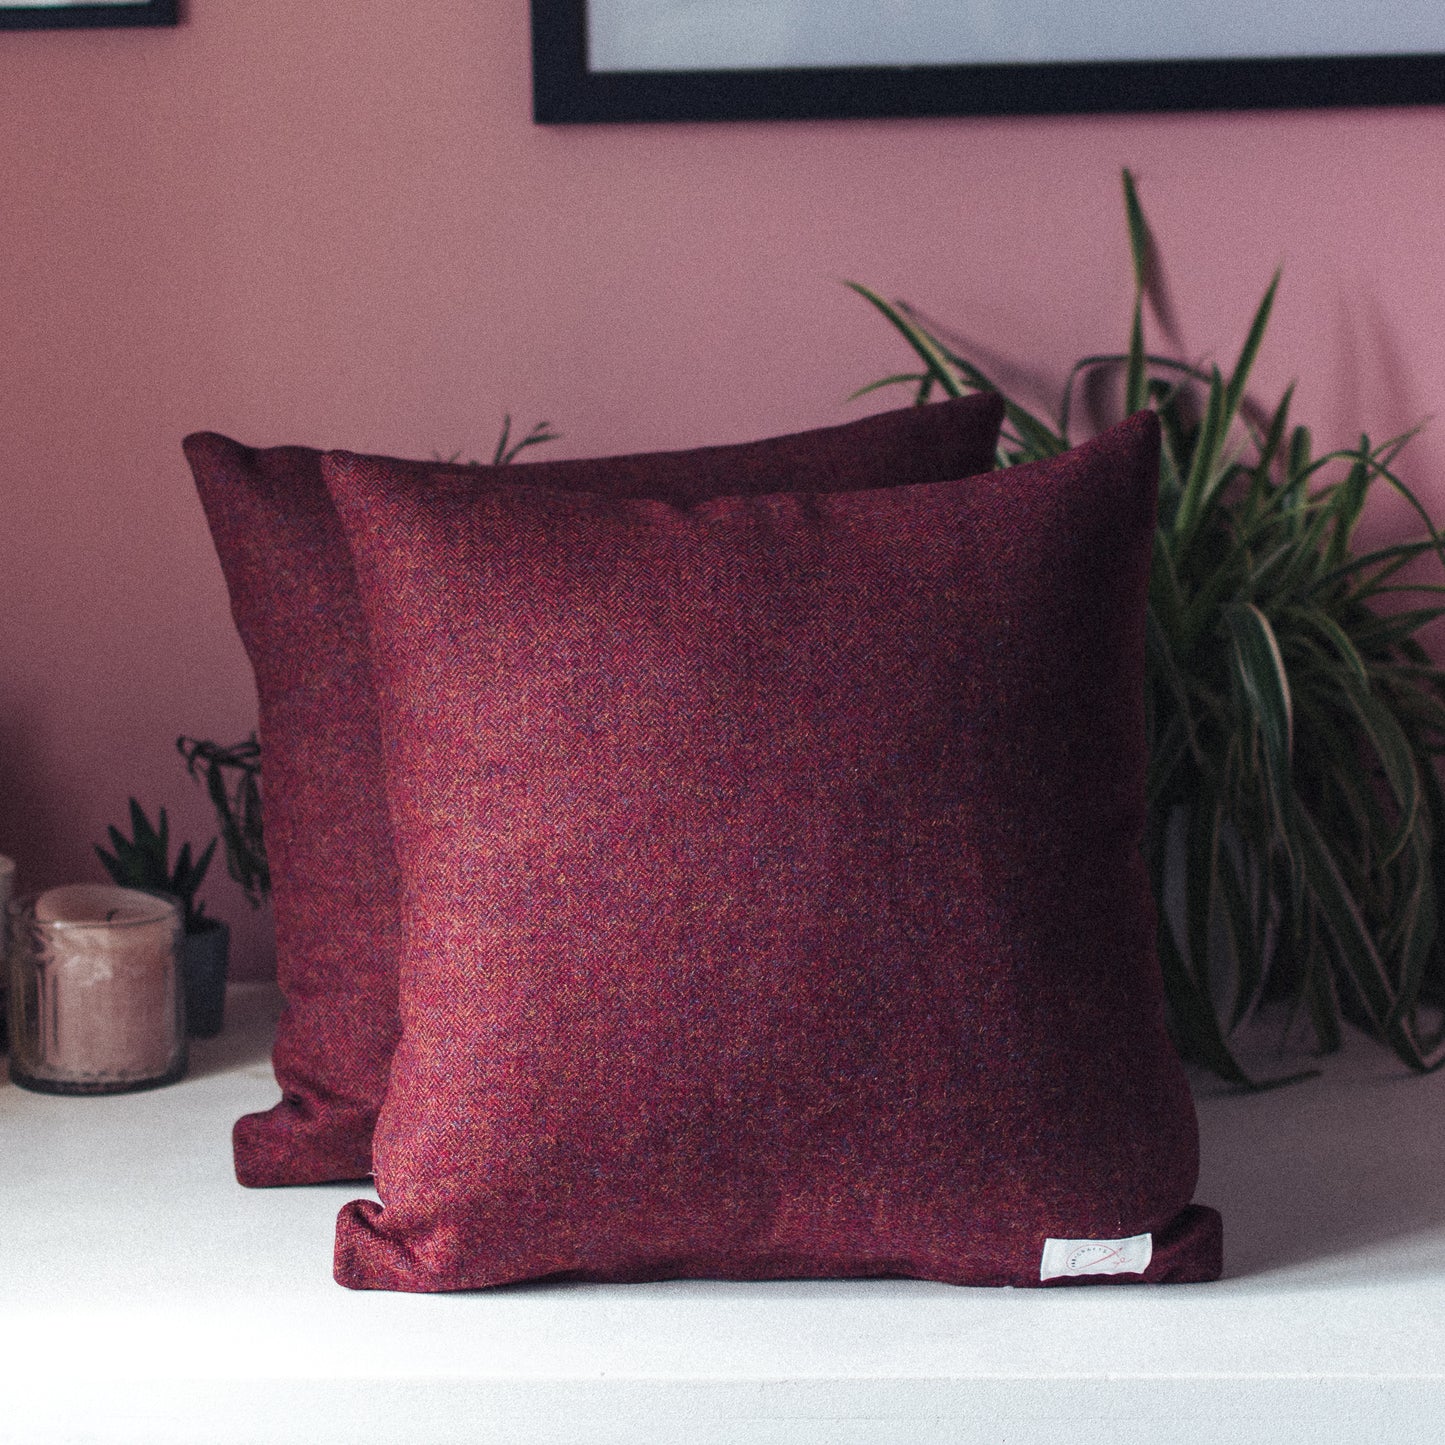 Burgundy Herringbone Tweed Cushion - Handmade Country Home Decor for Country Abodes and Farmhouses - Handmade by F&B in Yorkshire